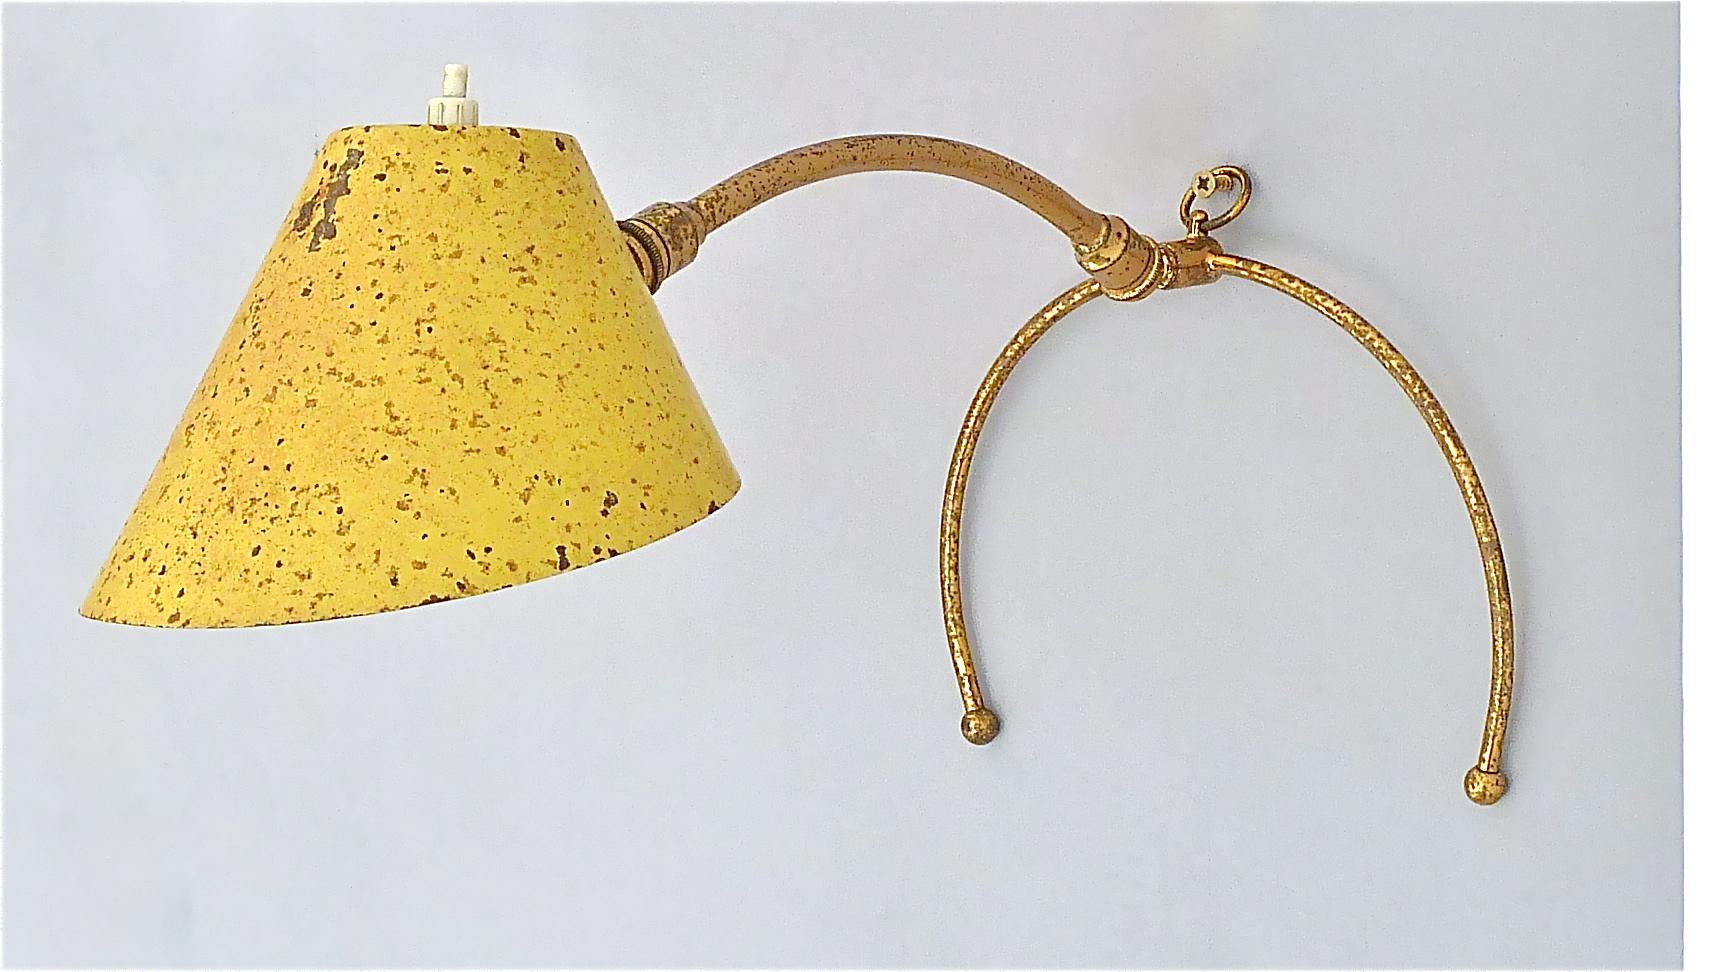 Rare Robert Mathieu Pierre Guariche French Table Wall Lamp Brass Yellow, 1950s For Sale 9